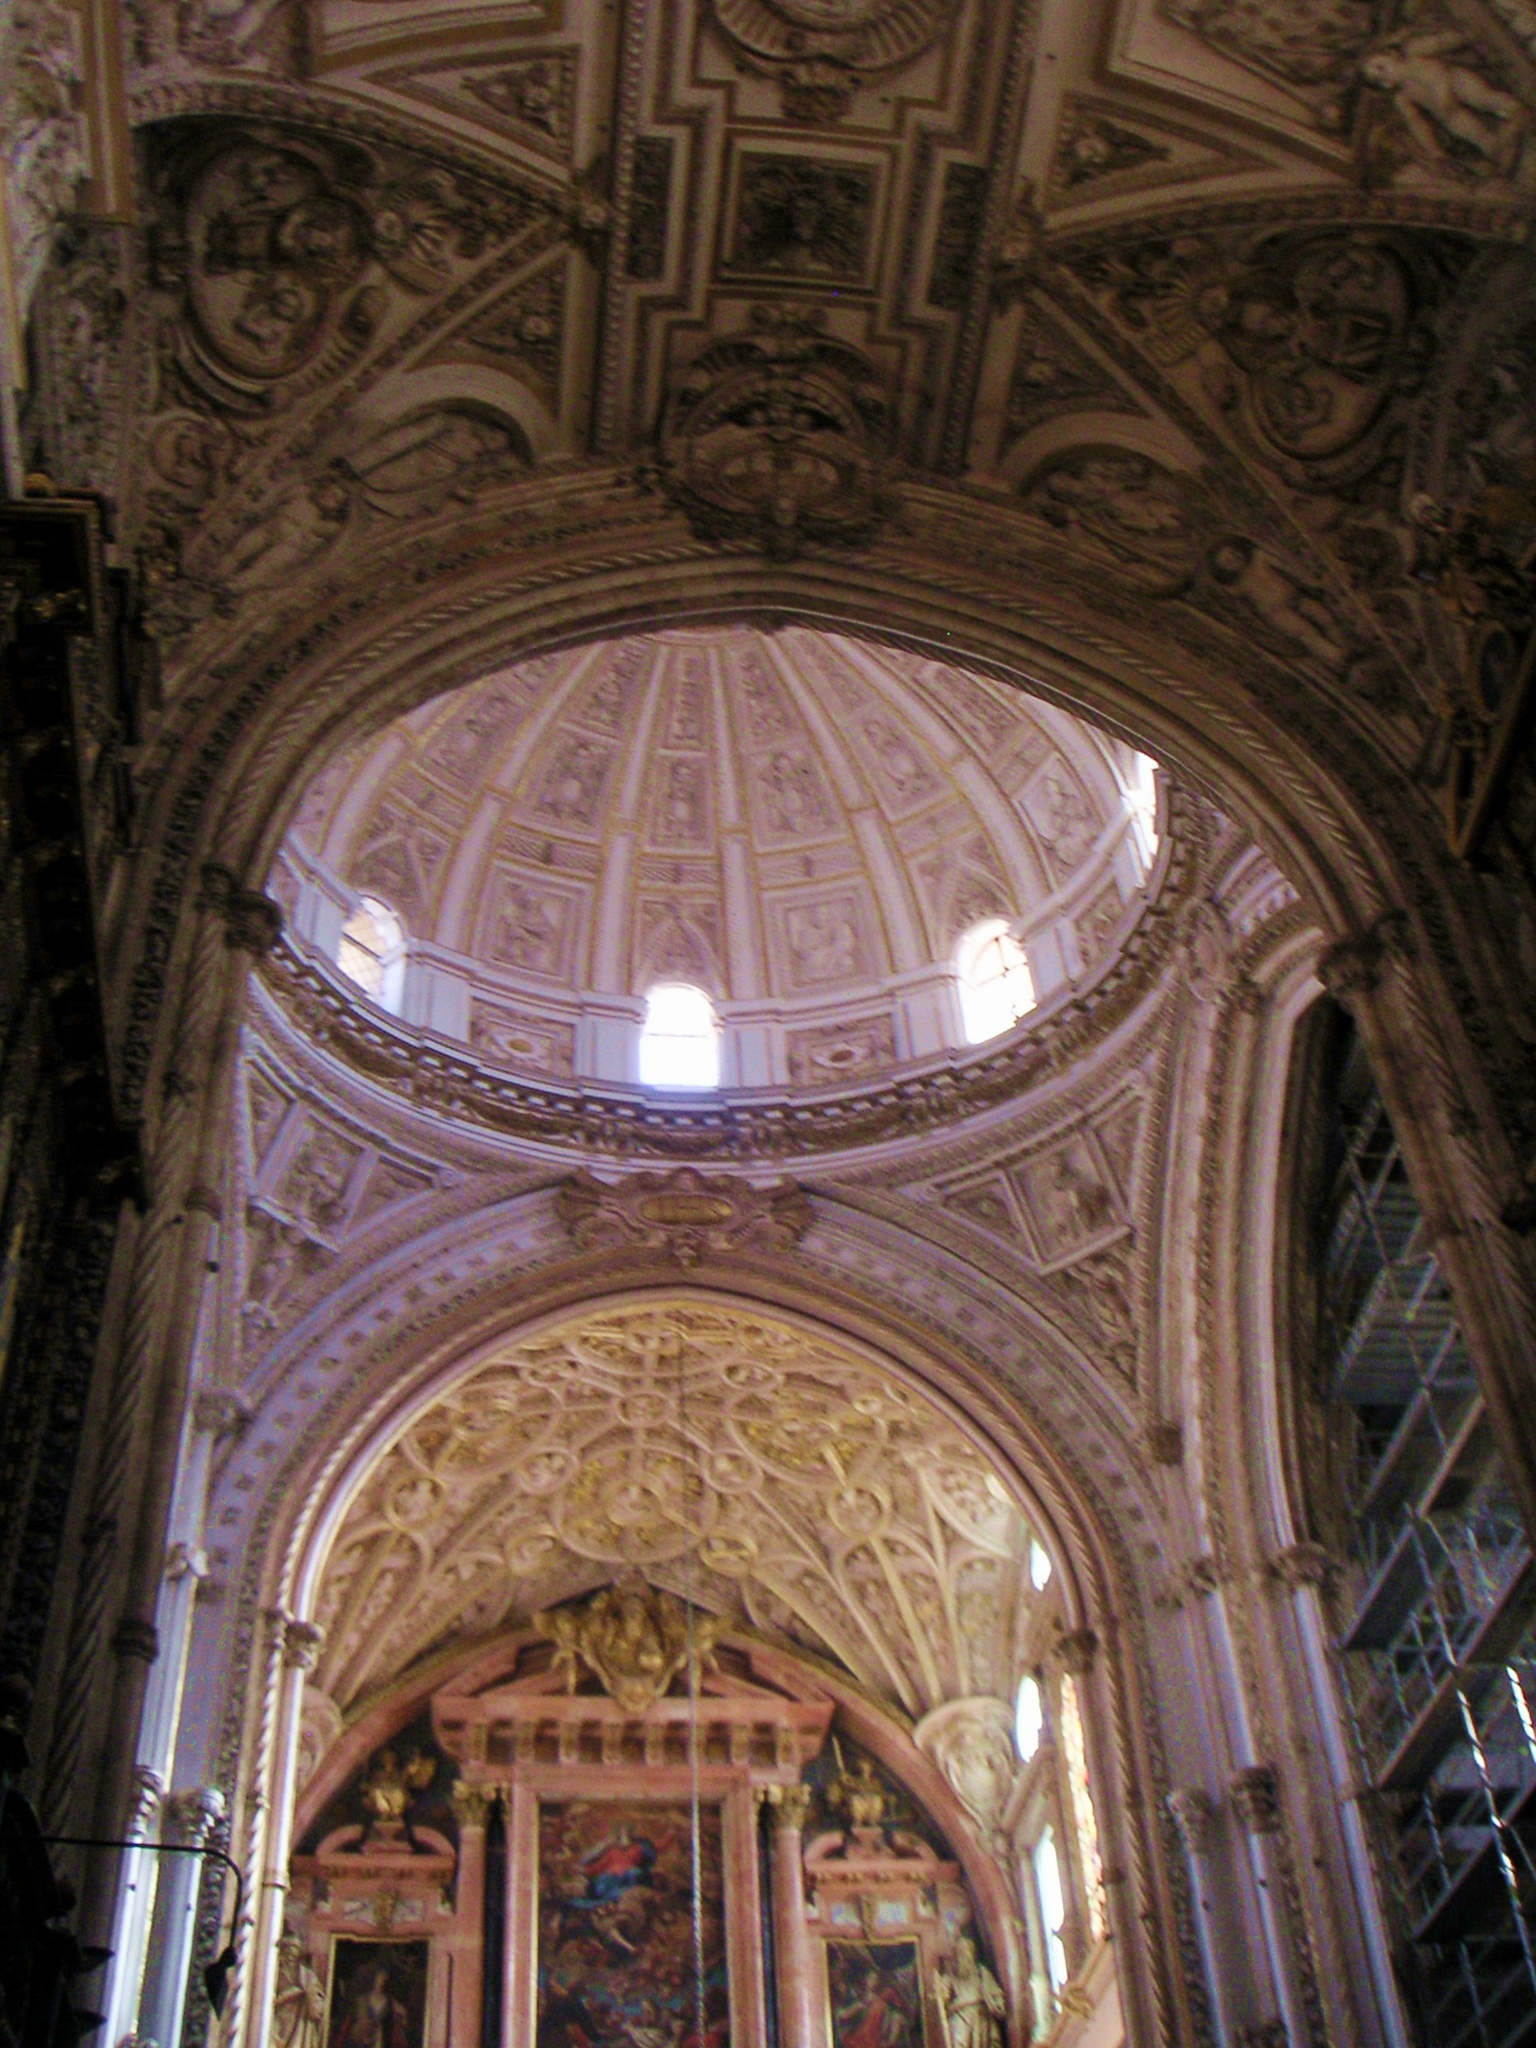 The stunning interior ceiling of the Cathederal